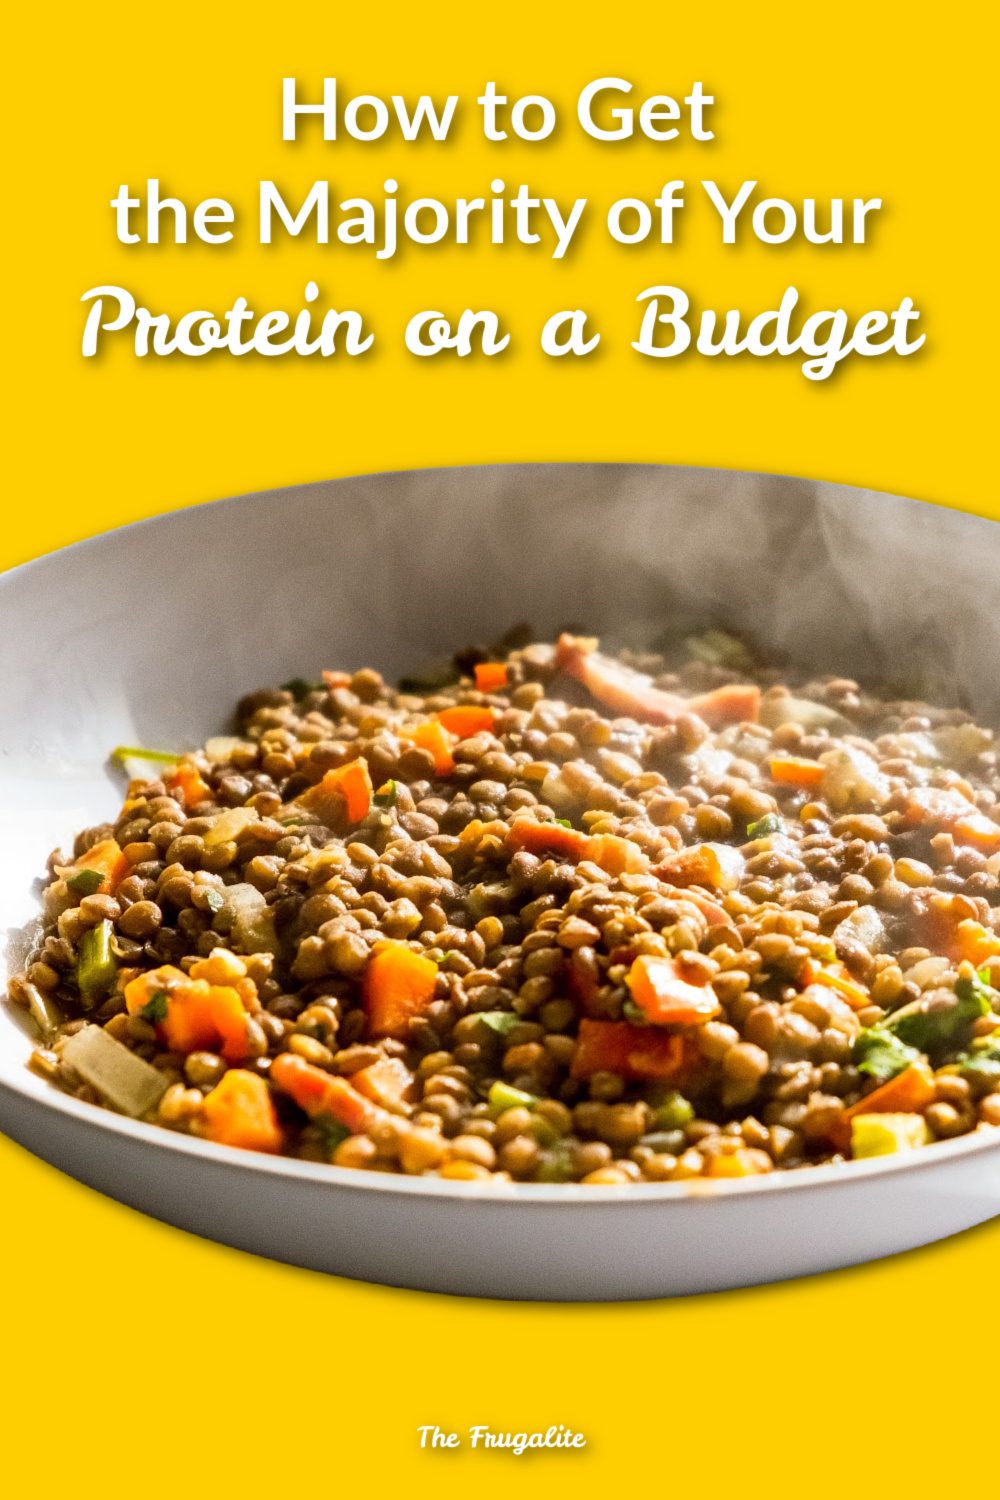 How to Get the Majority of Your Protein on a Budget